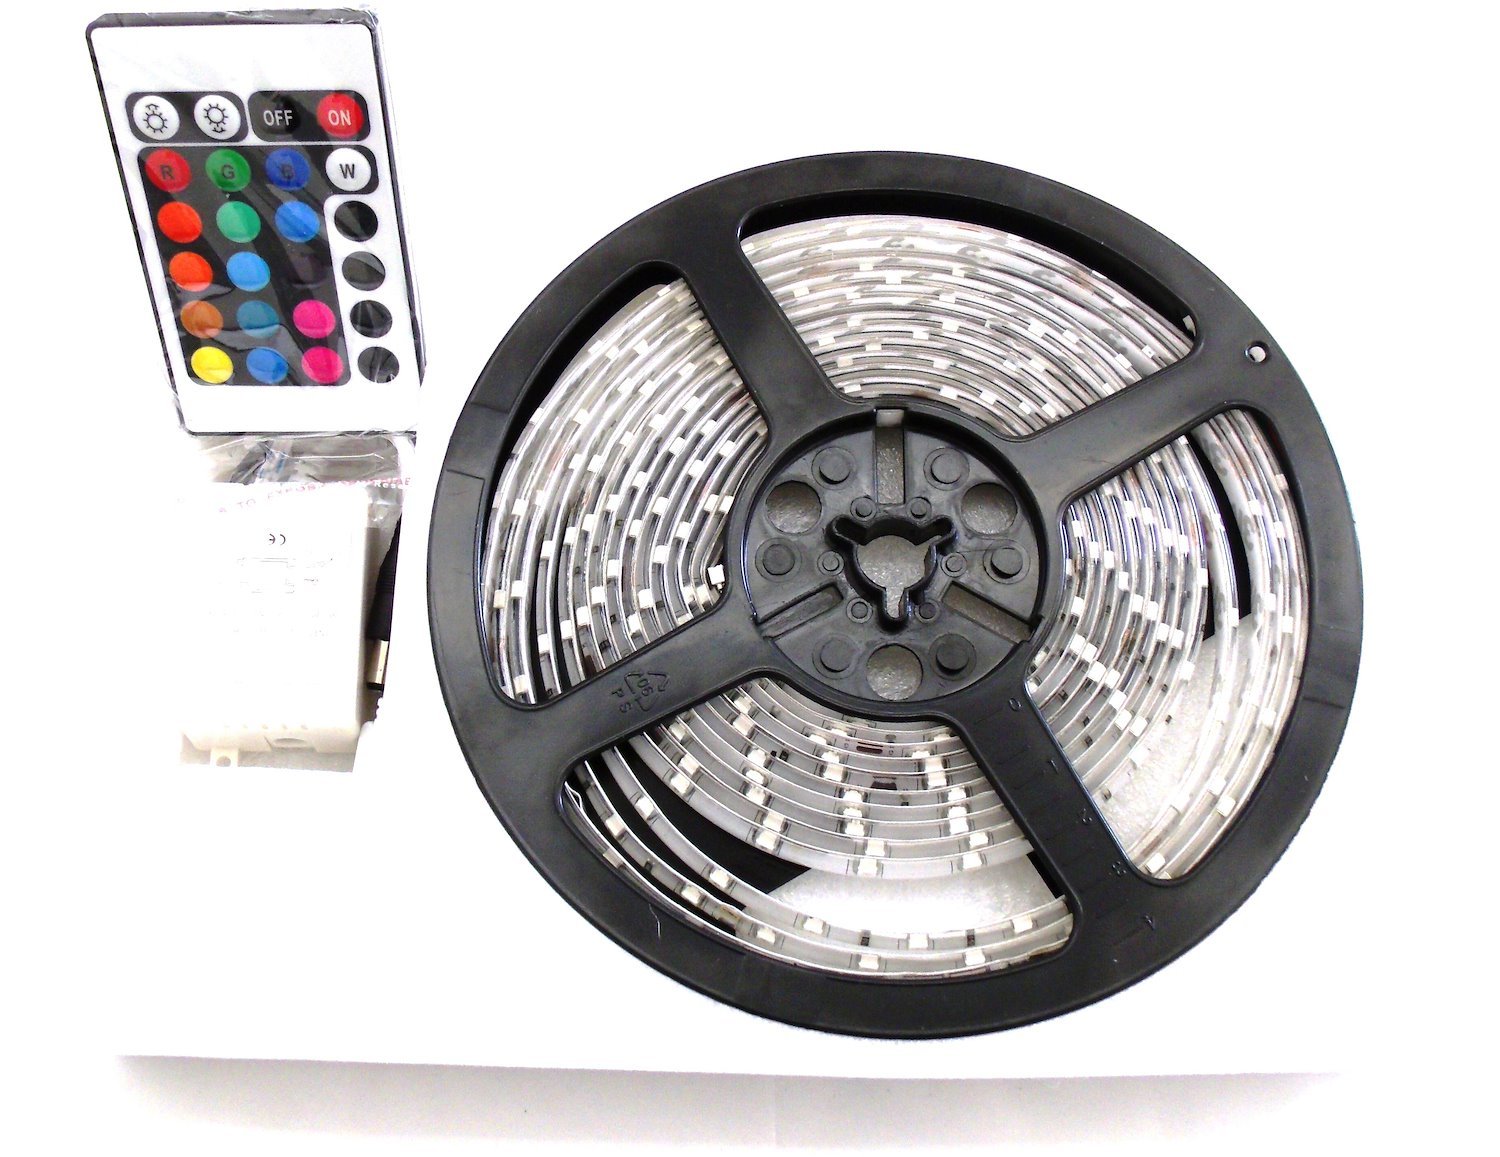 RS-16FT-5050-RGB 16 ft. 20-Color RGB Multi-Color 5050 LED Custom Tape Strip, w/ Remote, Includes 3M Adhesive Backing, IP66